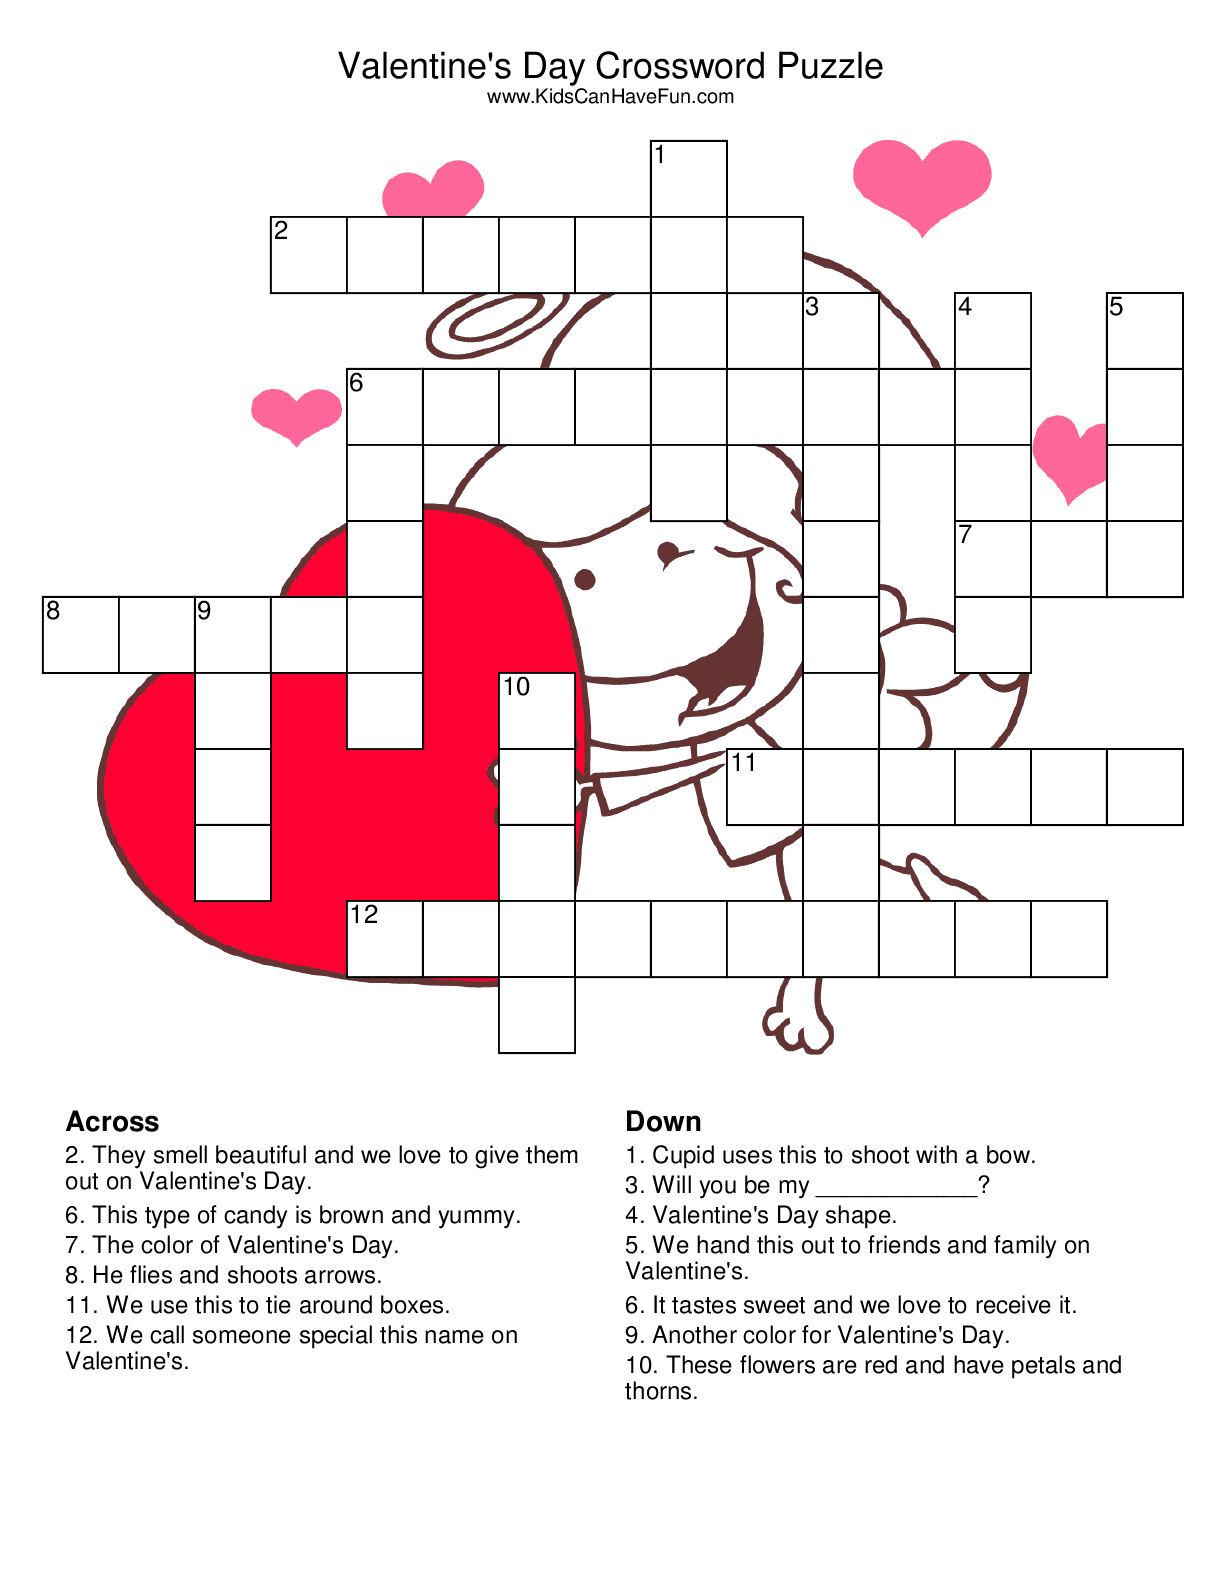 What A Great Way To Spend The Night With Your Love Then Being Smart - Free Printable Valentine Crossword Puzzles